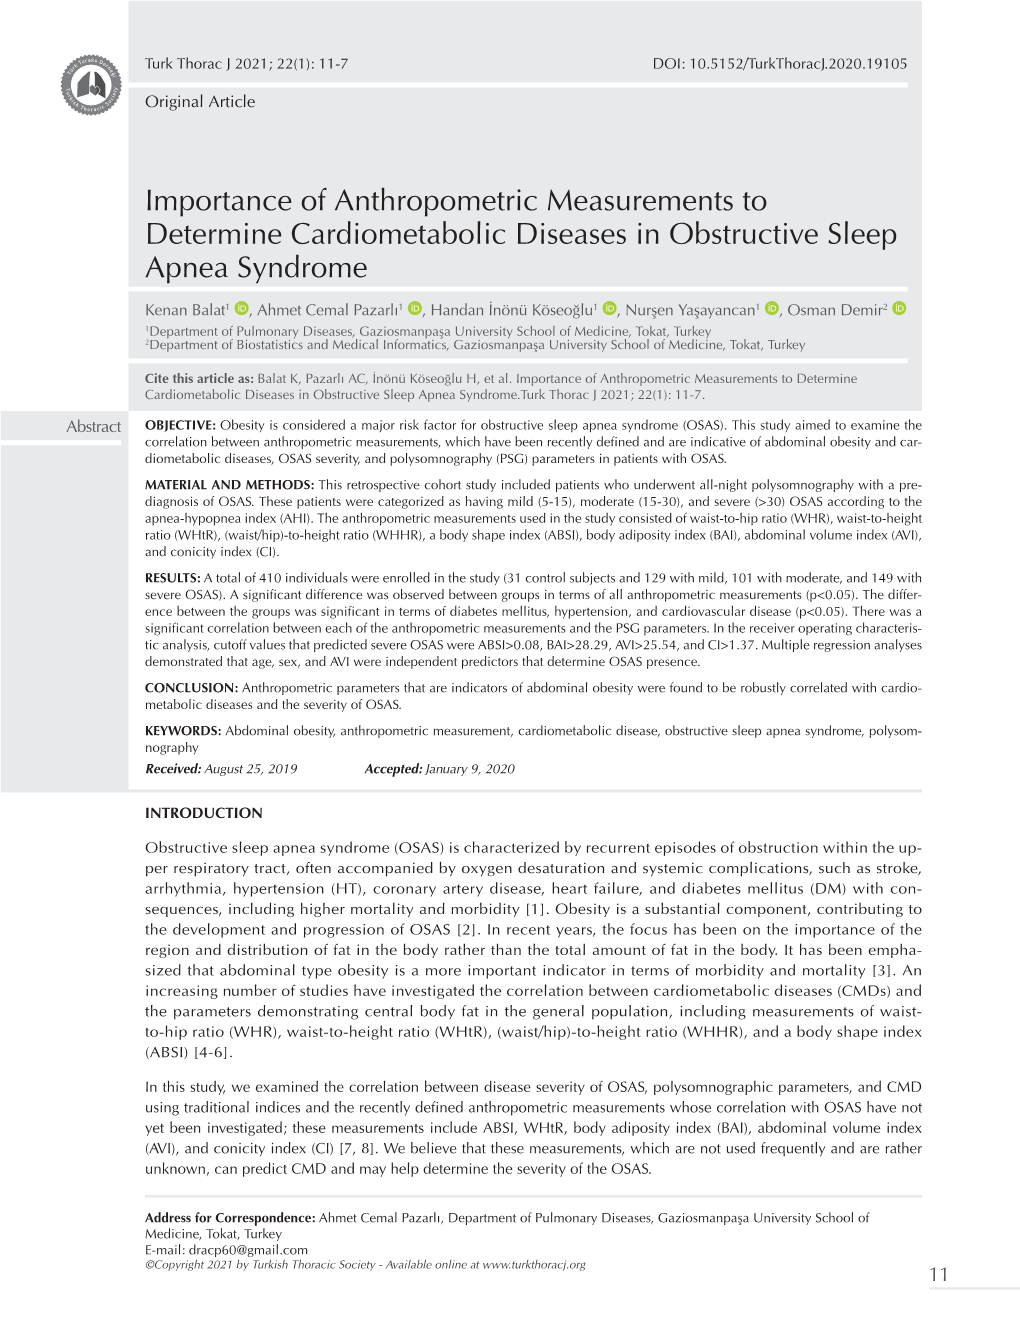 Importance of Anthropometric Measurements to Determine Cardiometabolic Diseases in Obstructive Sleep Apnea Syndrome